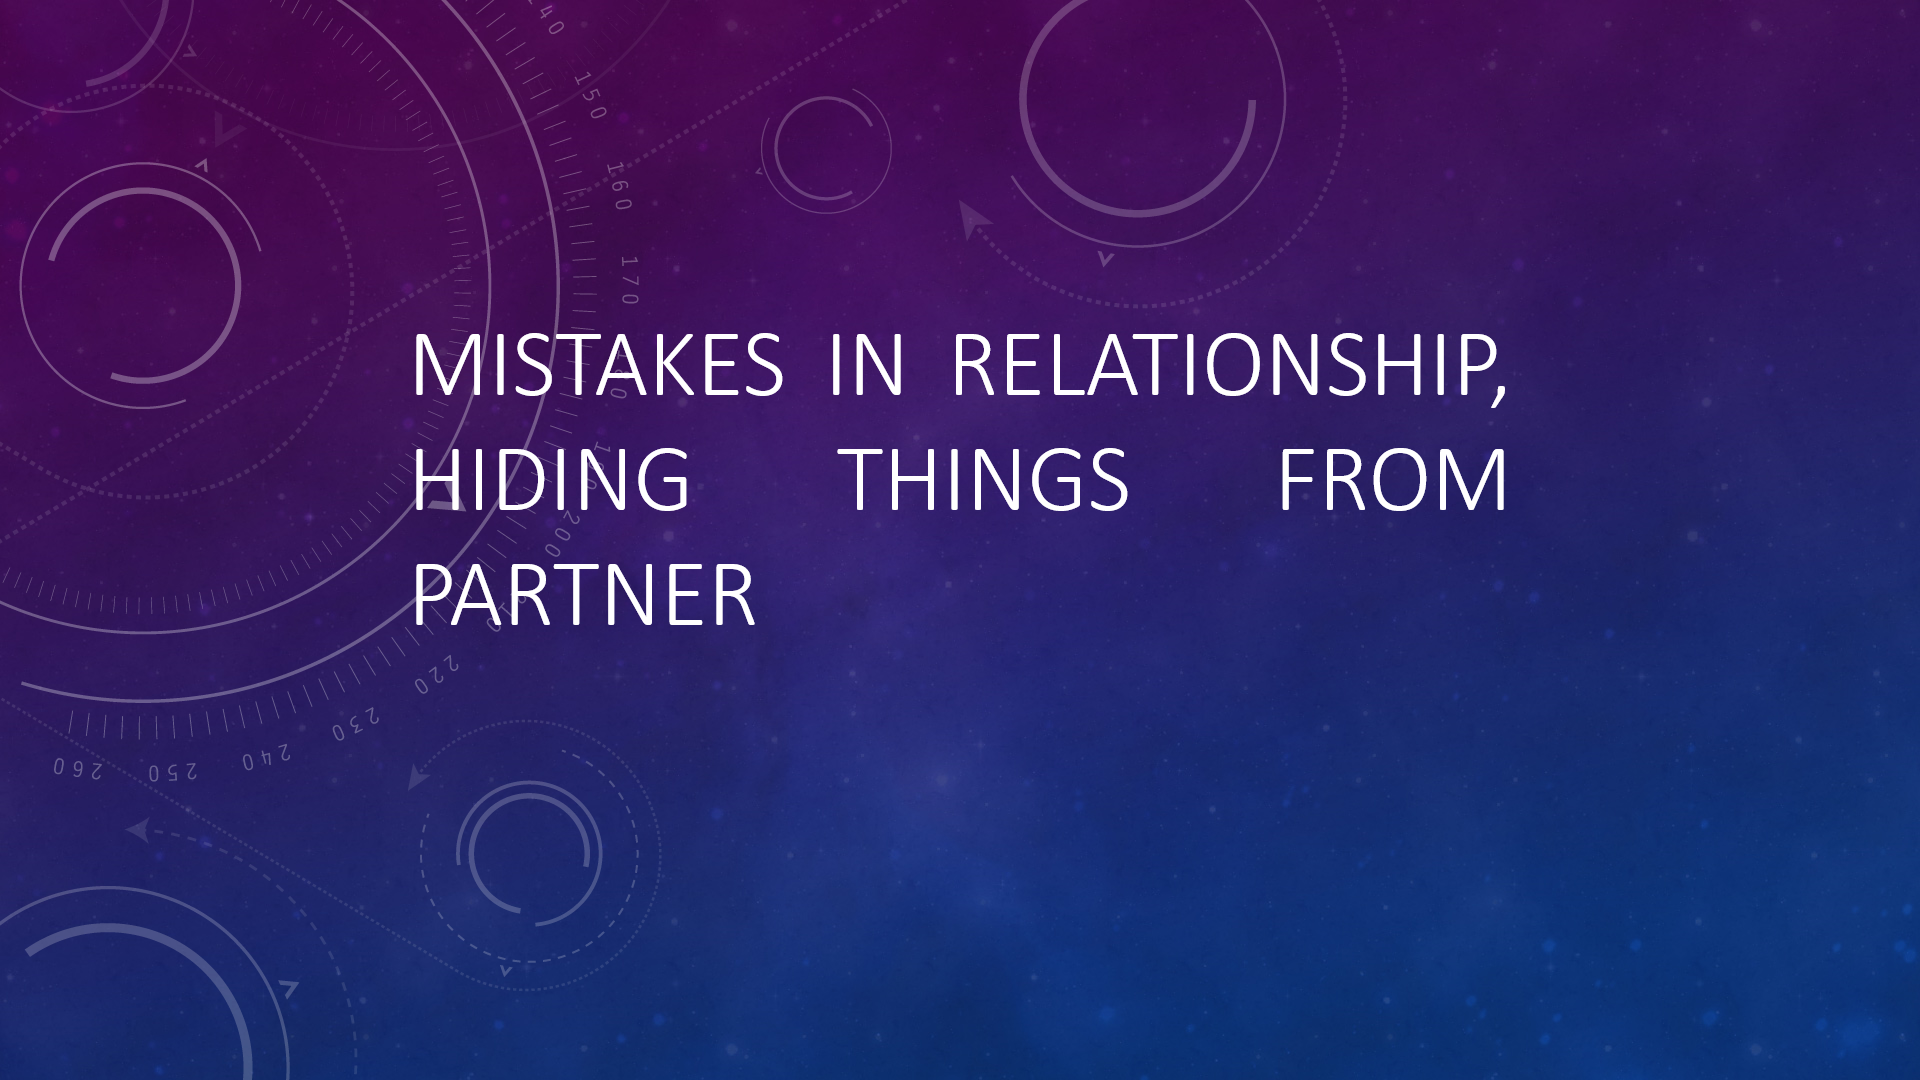 Mistakes in relationship, hiding things from partner